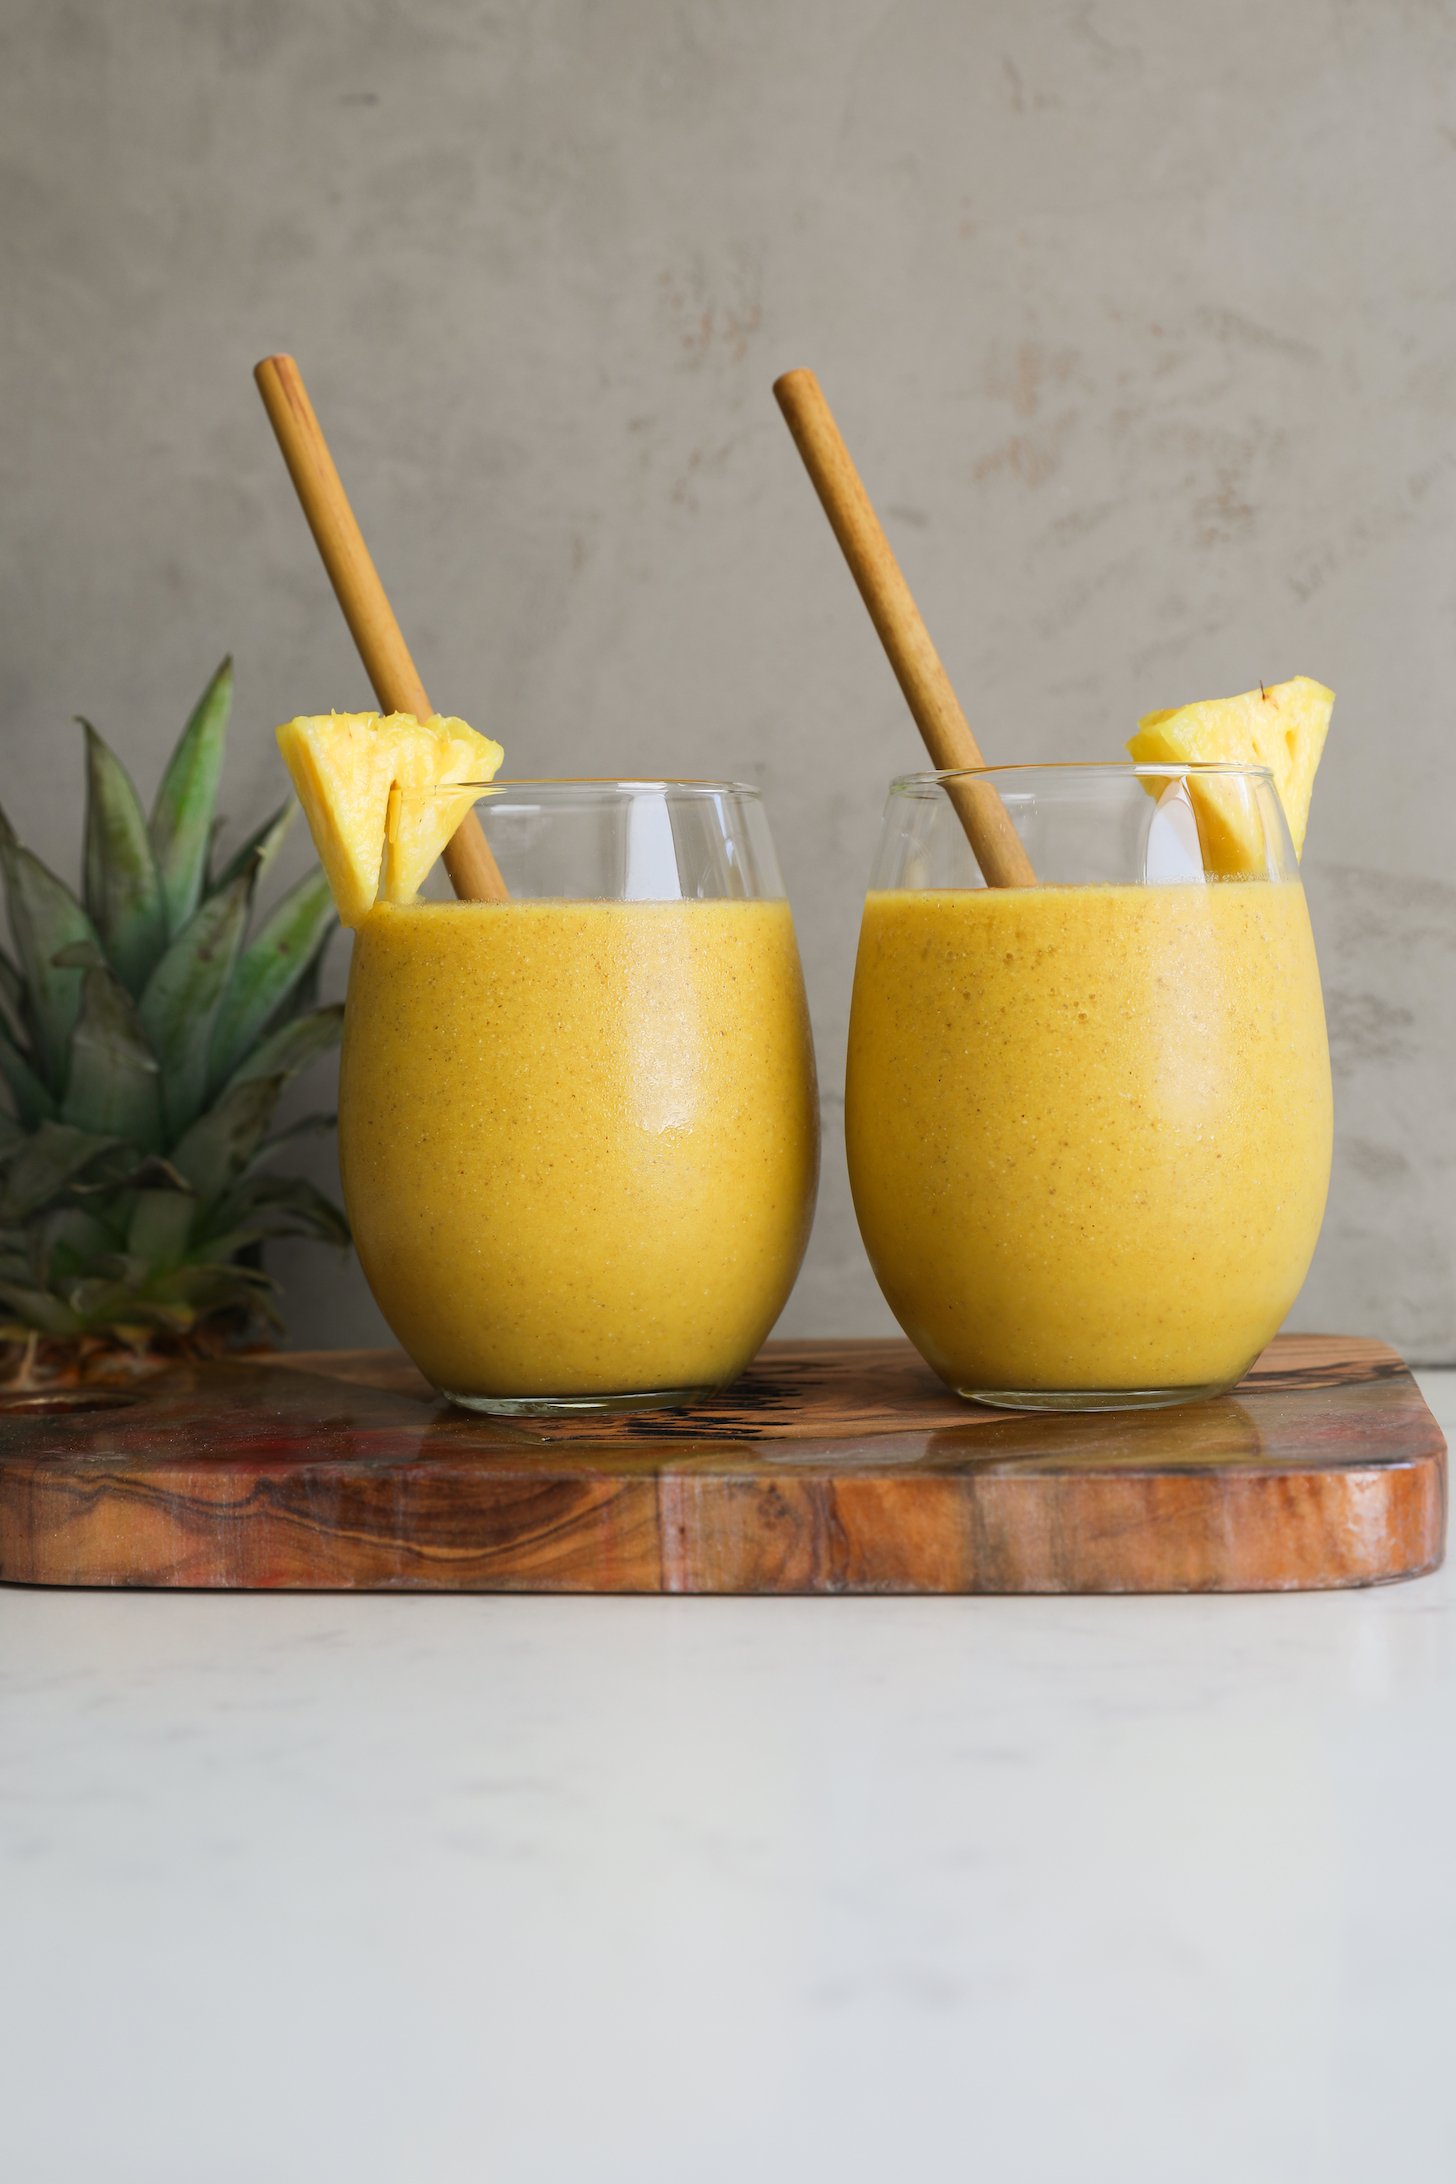 Perspective image of two glasses of yellow smoothie with bamboo straws in them.